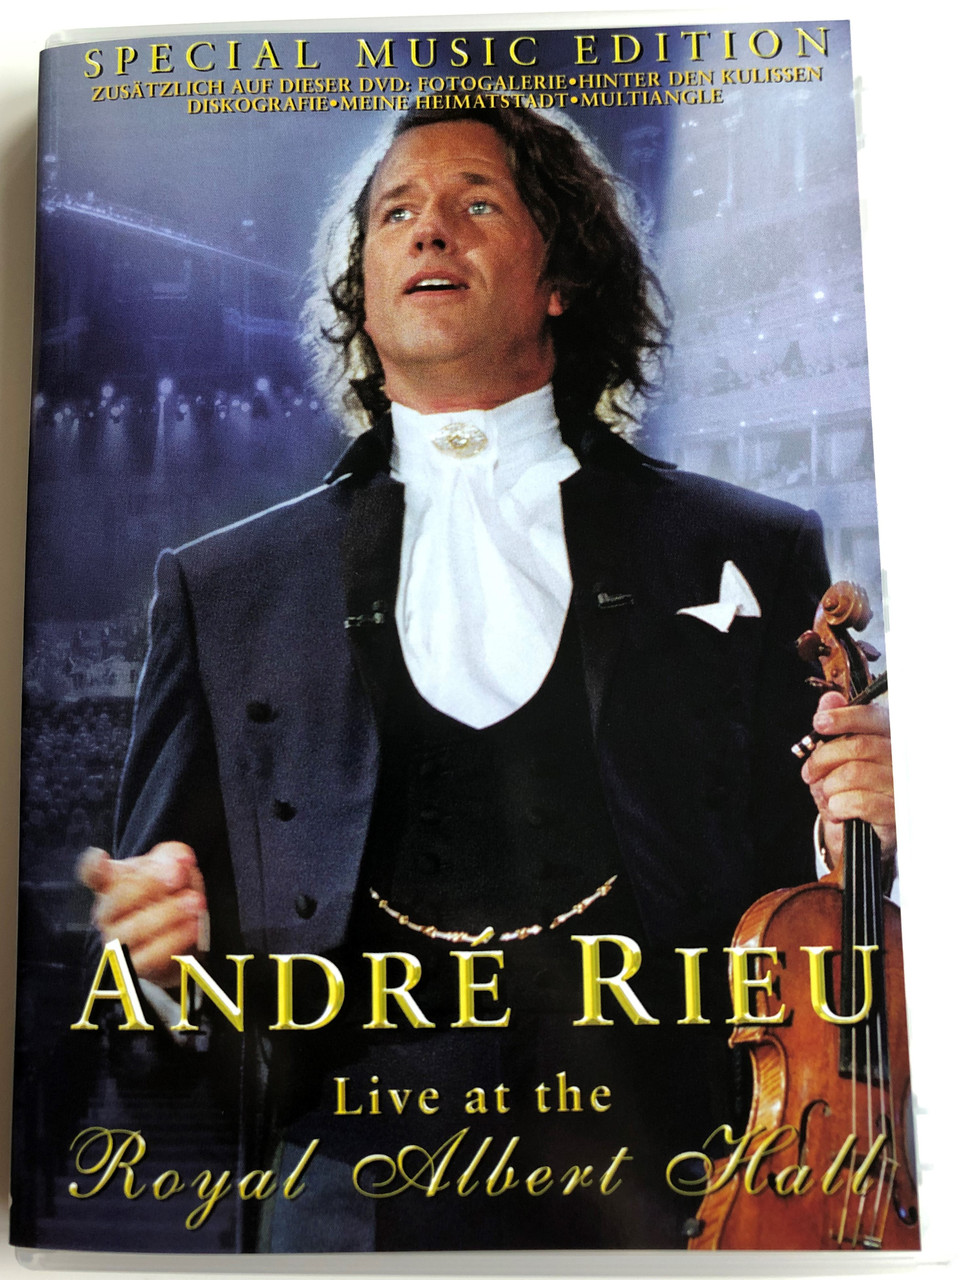 André Rieu Live at the Royal Albert Hall DVD 2002 Special Music Edition /  Directed by Jean-Philippe Rieu / Mawa Film & Medien / Hava Nagila, Funiculi  Funicula, The André Sisters, Sirtaki - bibleinmylanguage